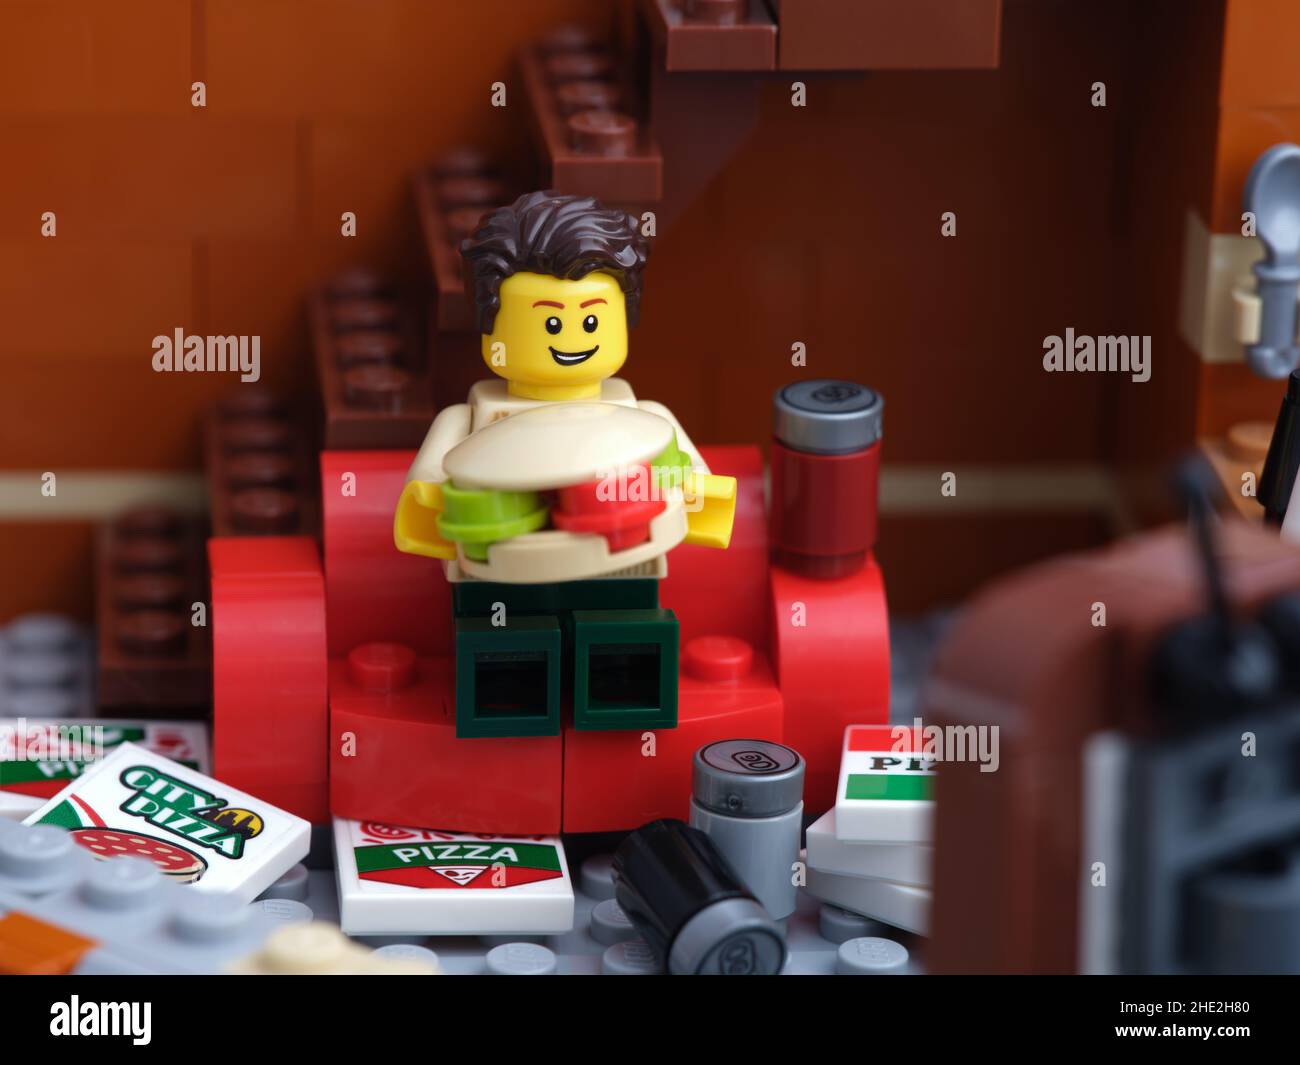 Tambov, Russian Federation - January 03, 2022 A Lego man sitting on a red couch eating a burger with pizza and soda cans near him Stock Photo